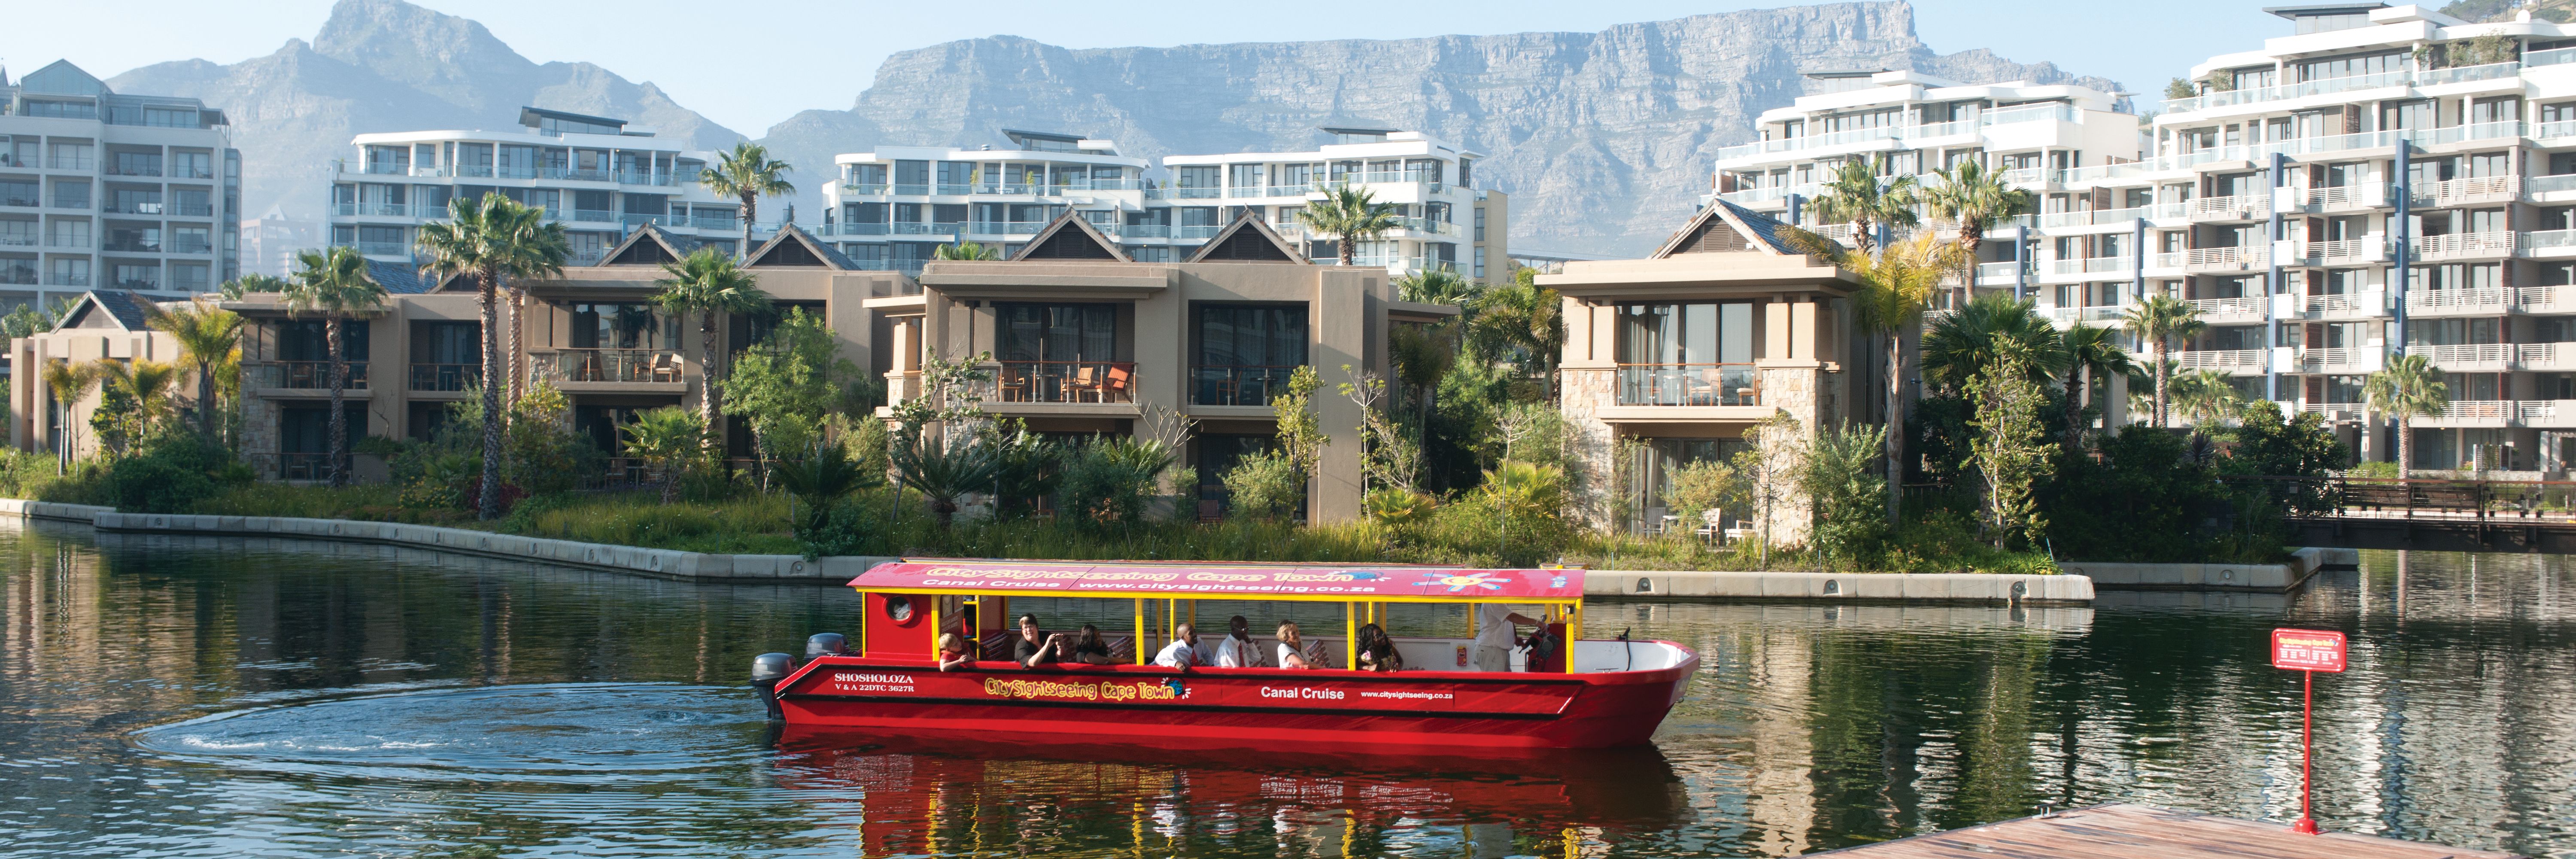 boat cruise cape town prices